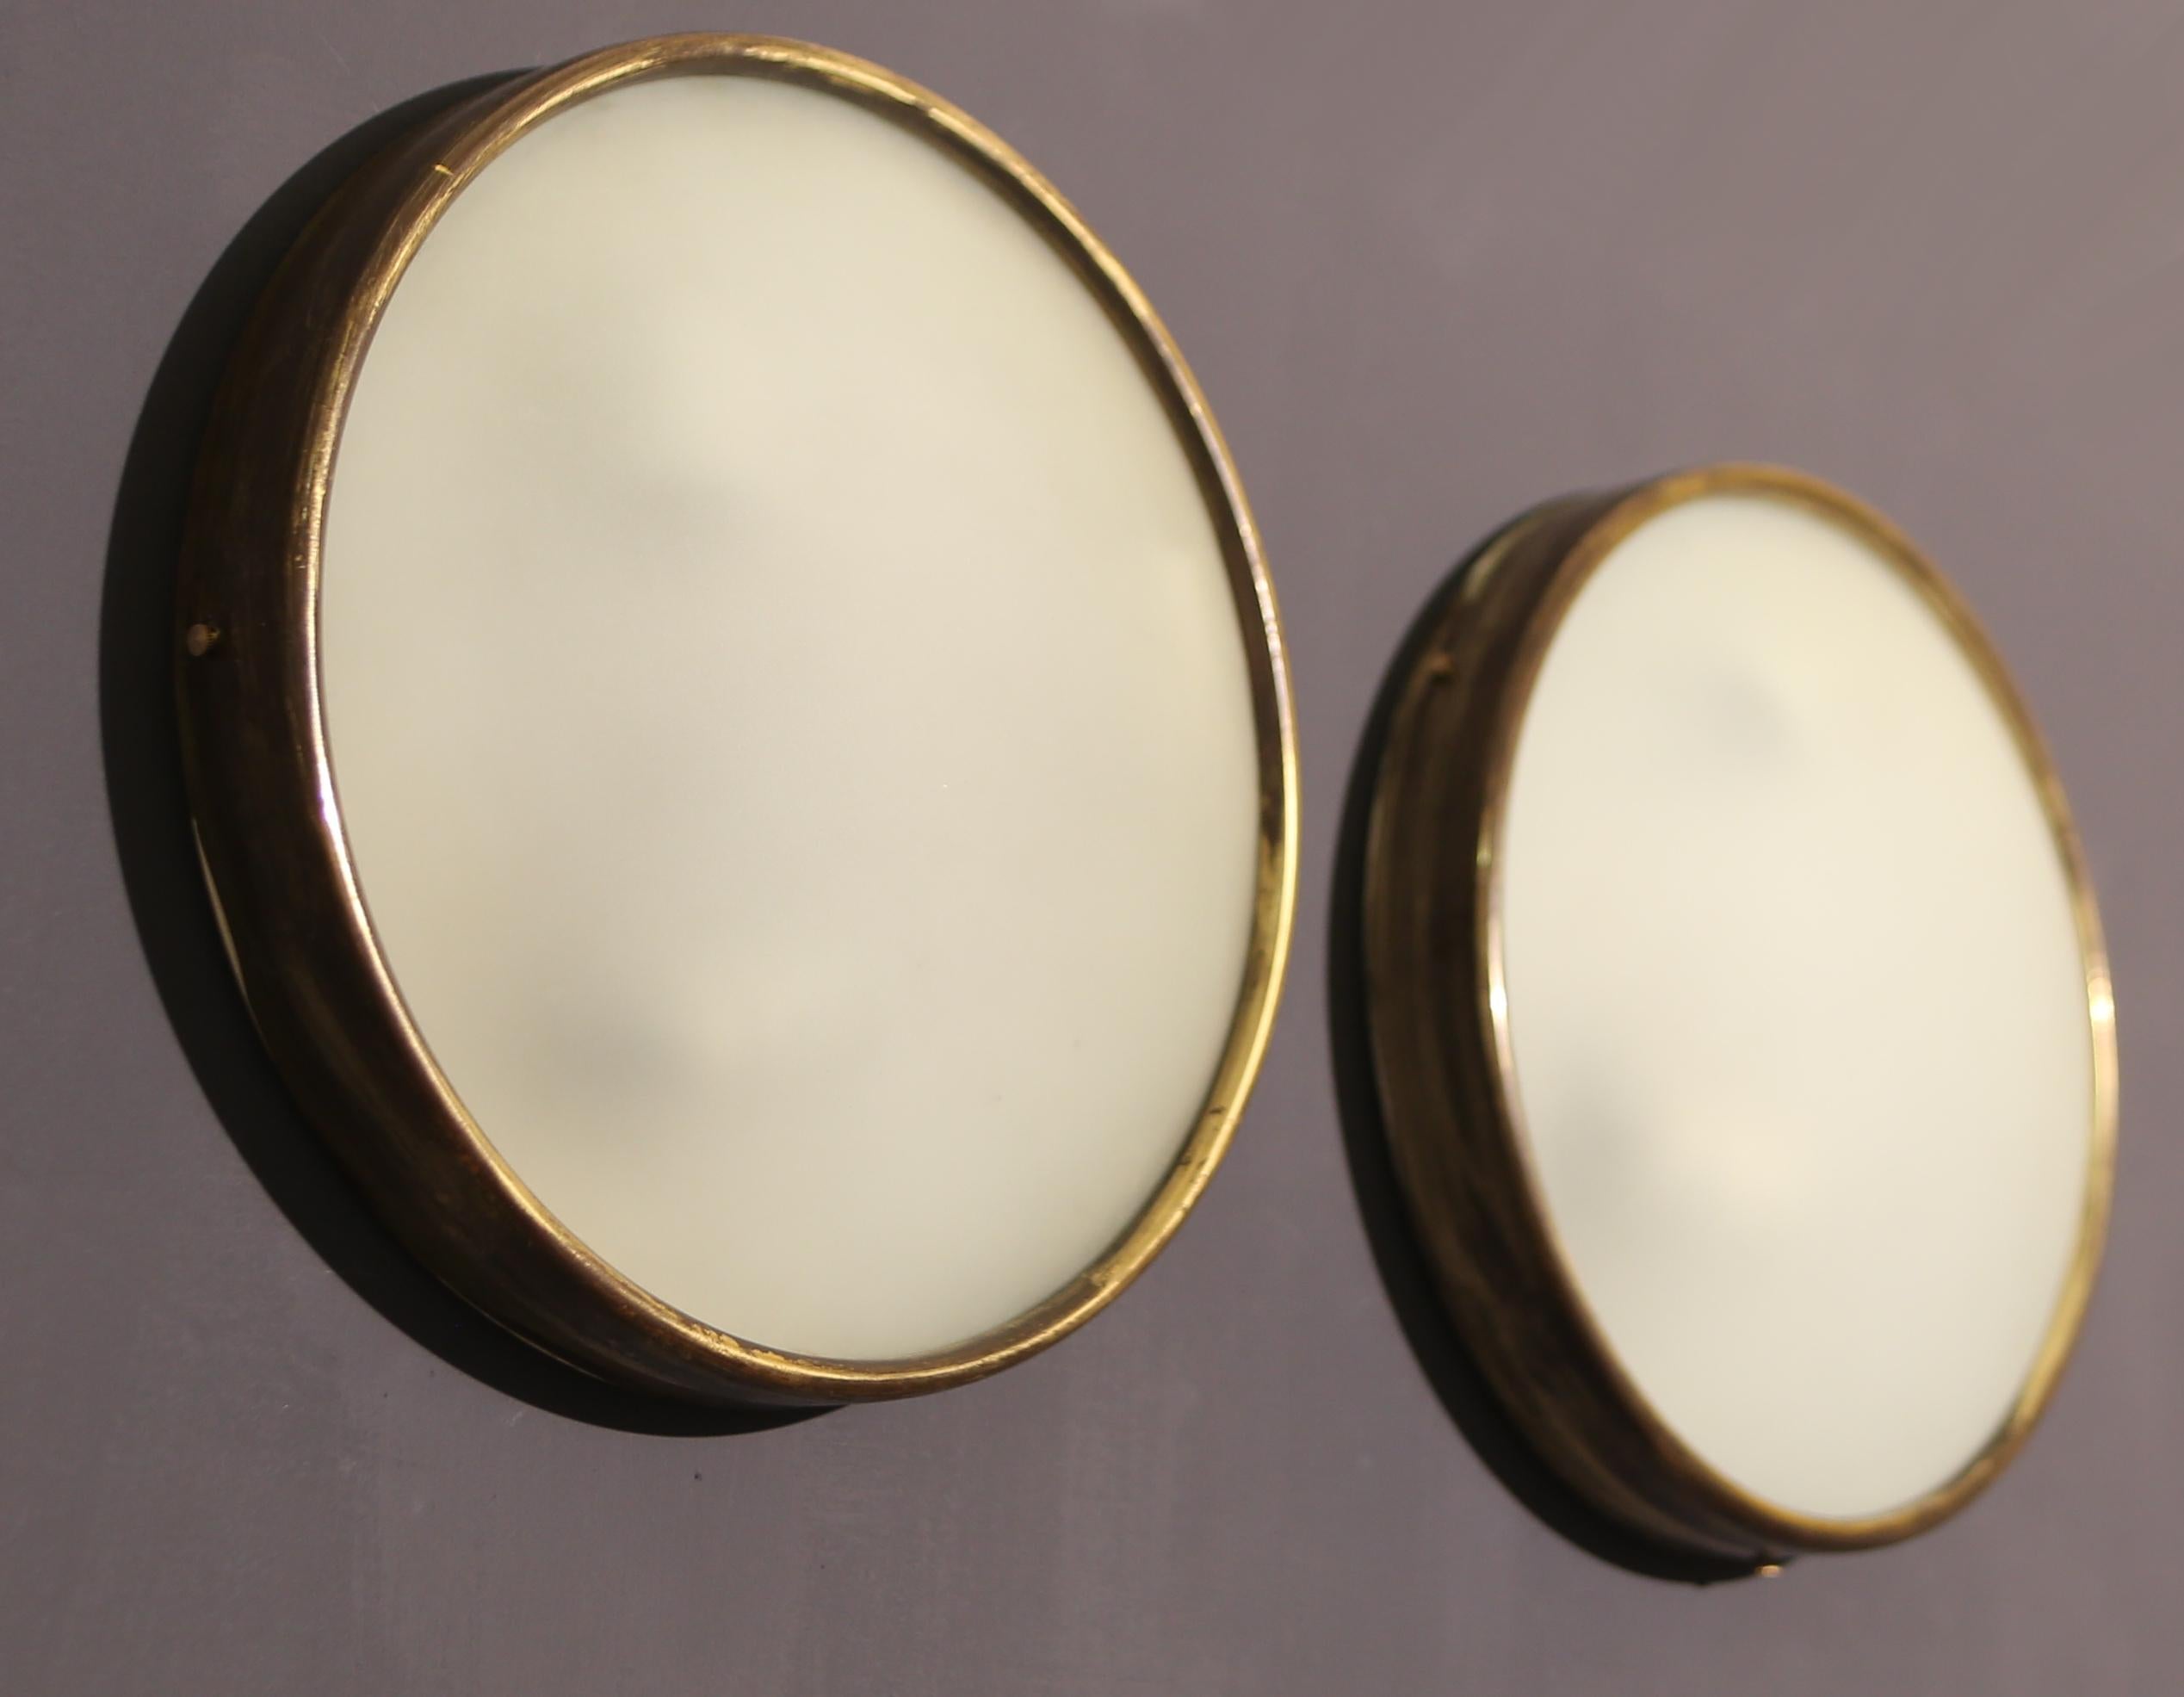 Mid-Century Modern Gino Sarfatti rare set of ceiling lights  made for the Milanese residence